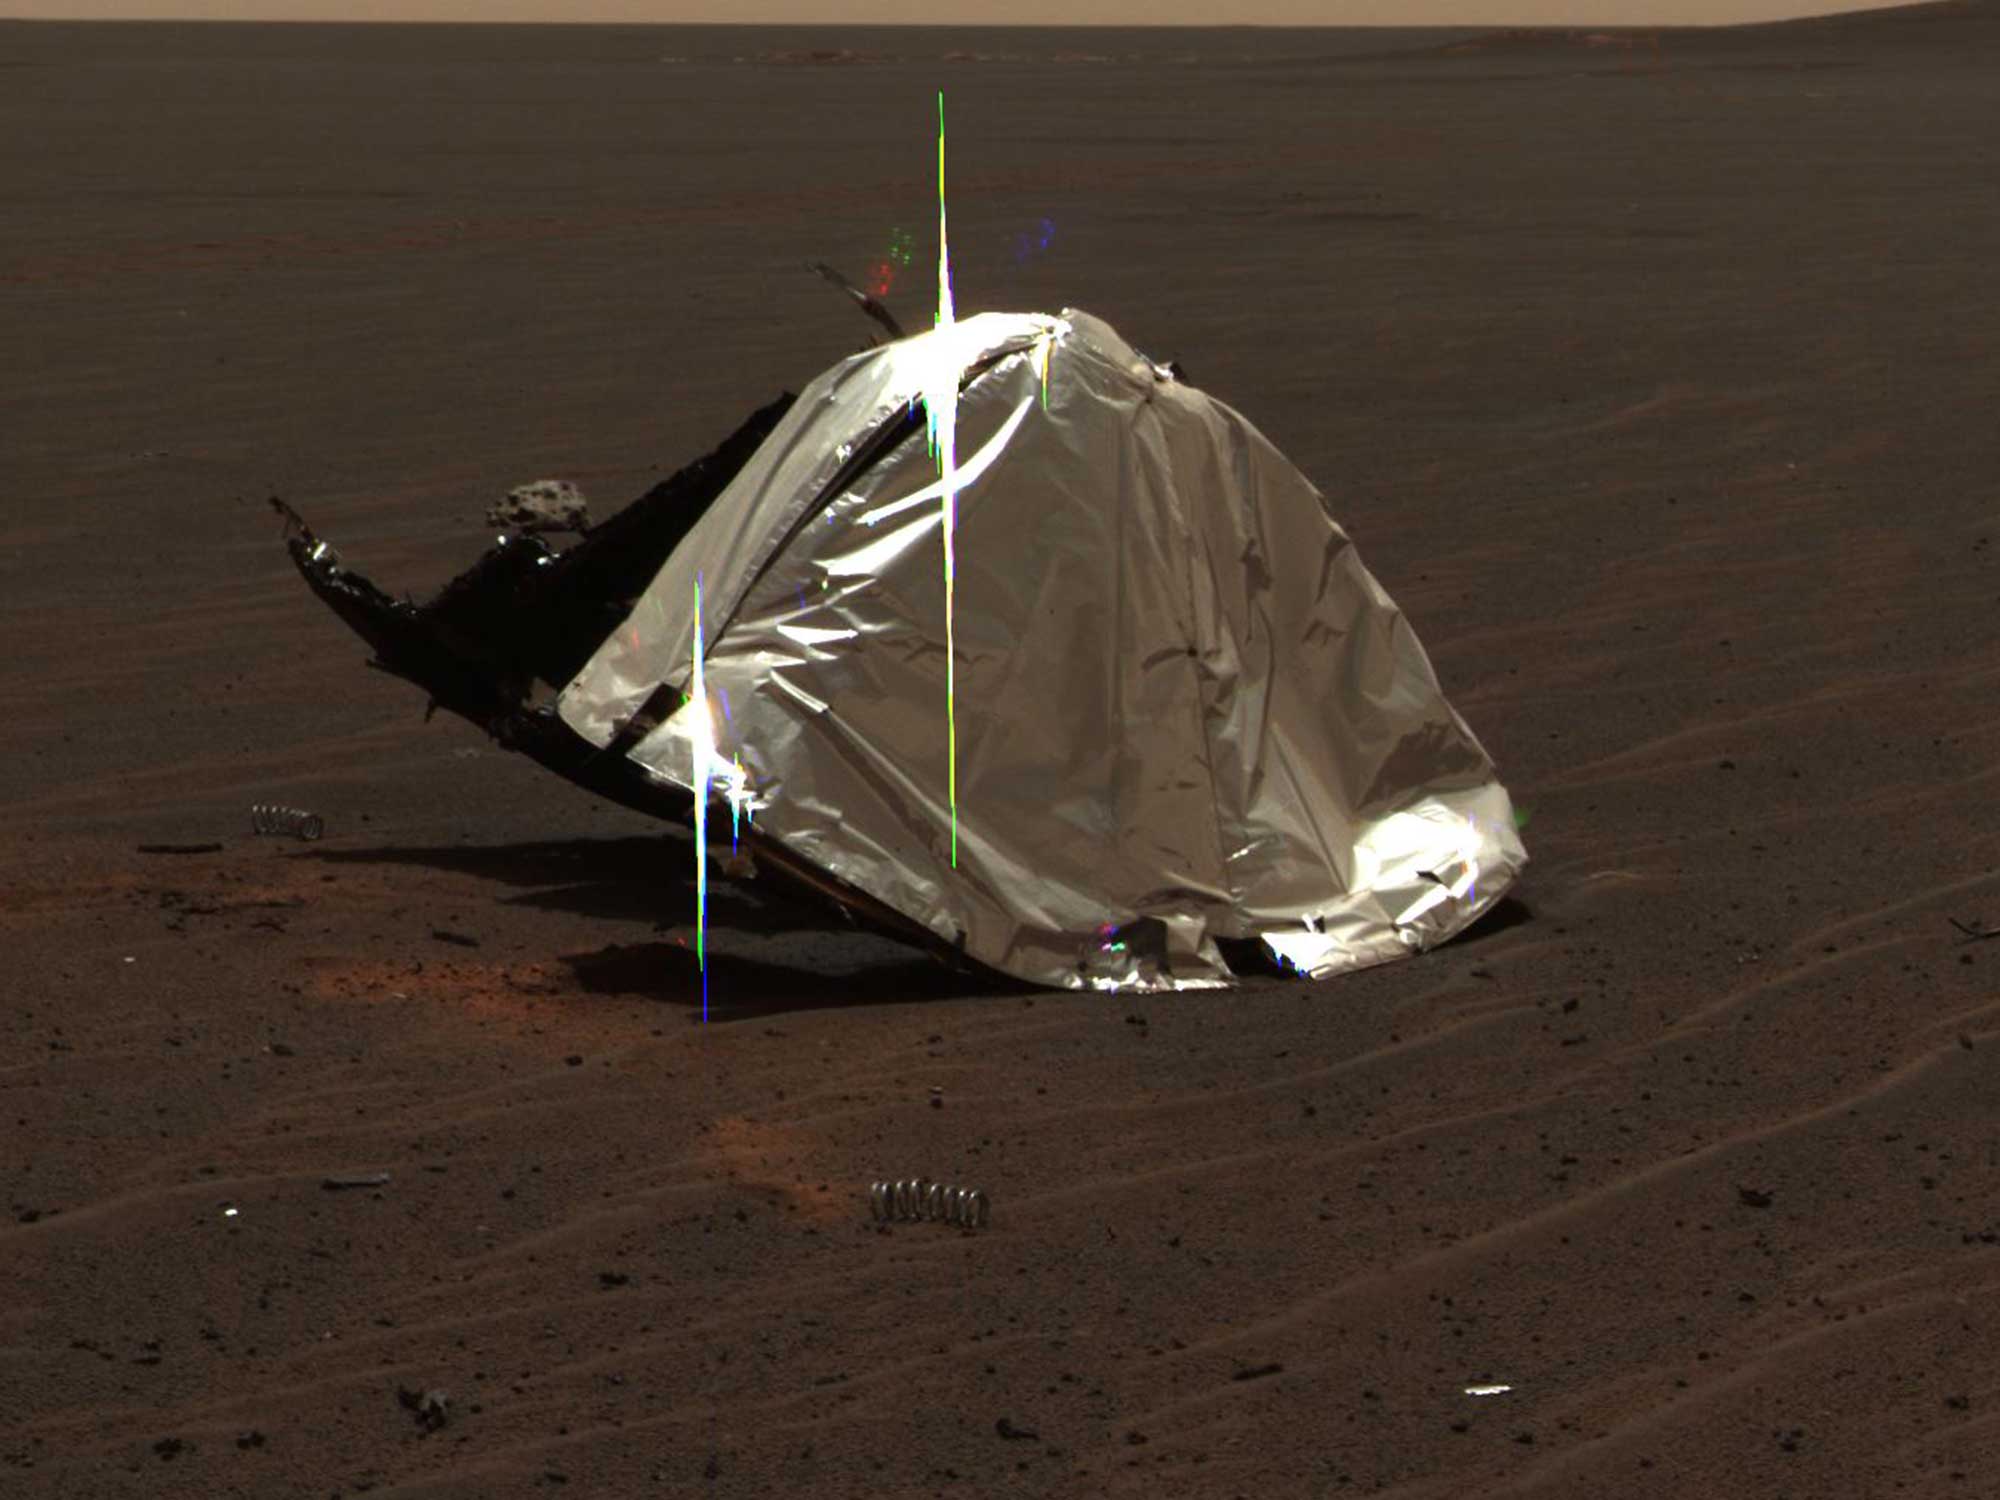 Rovers on Mars frequently come across debris–like this heat shield and spring–from their own or other missions.